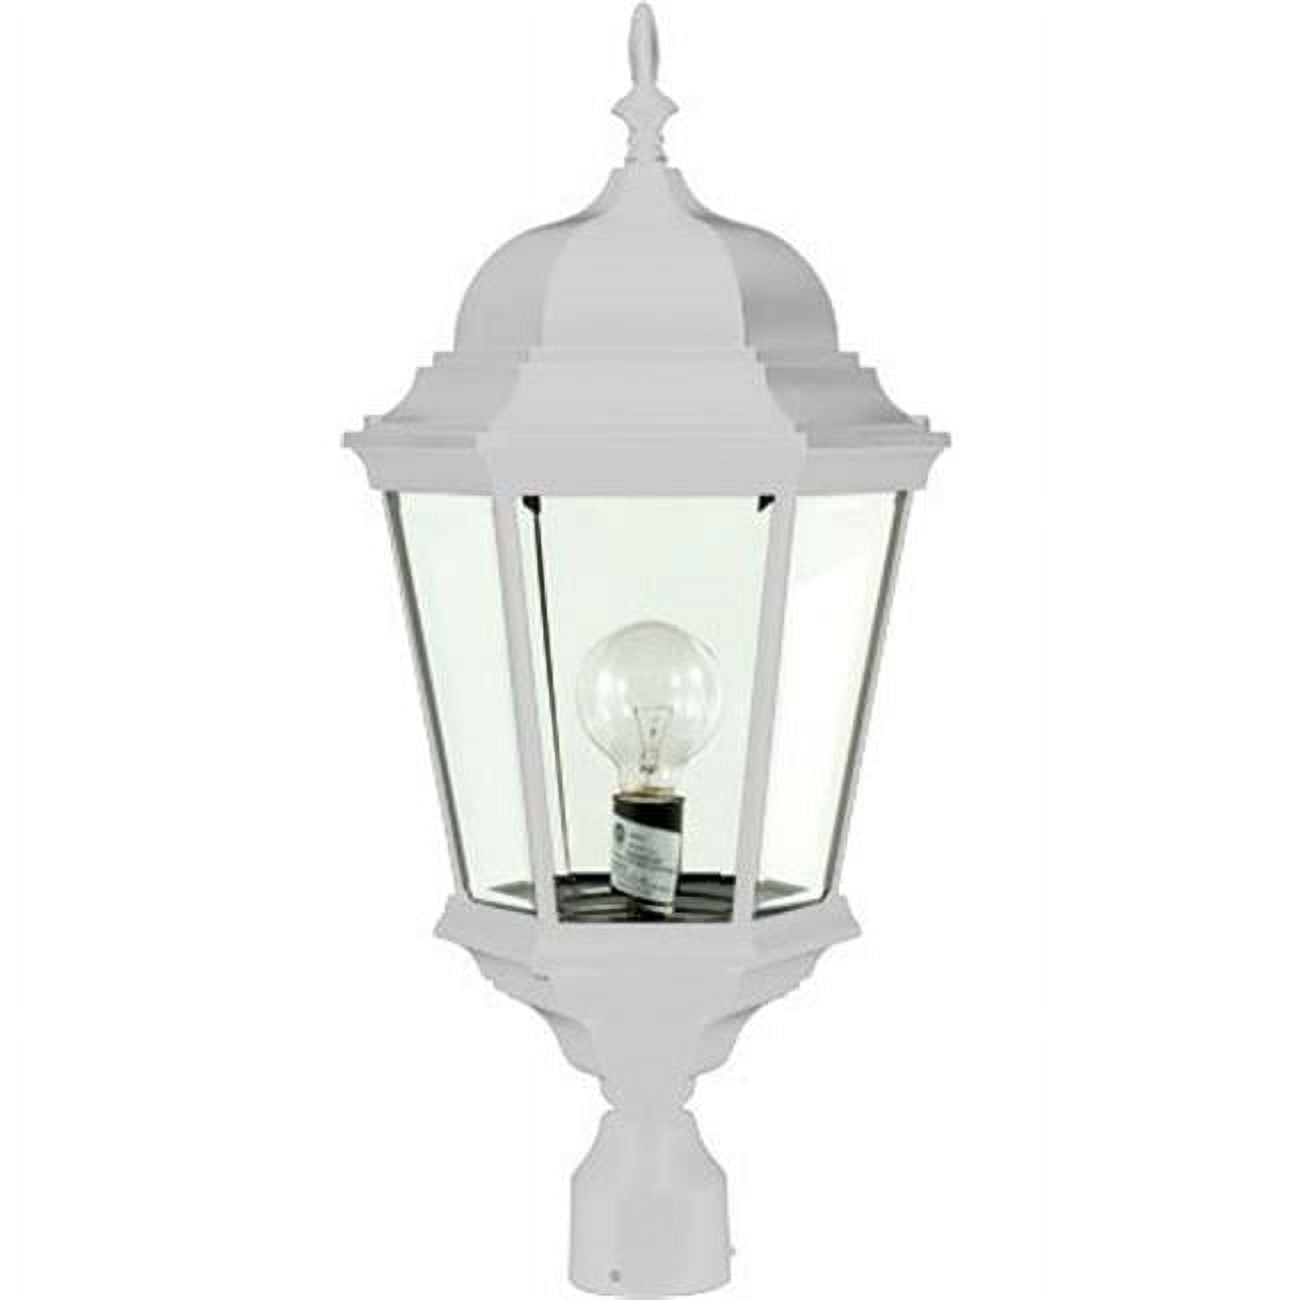 Picture of Dabmar Lighting GM235-W Powder Coated Cast Aluminum Post Top Light Fixture, White - 26.75 x 12.75 x 12.75 in.